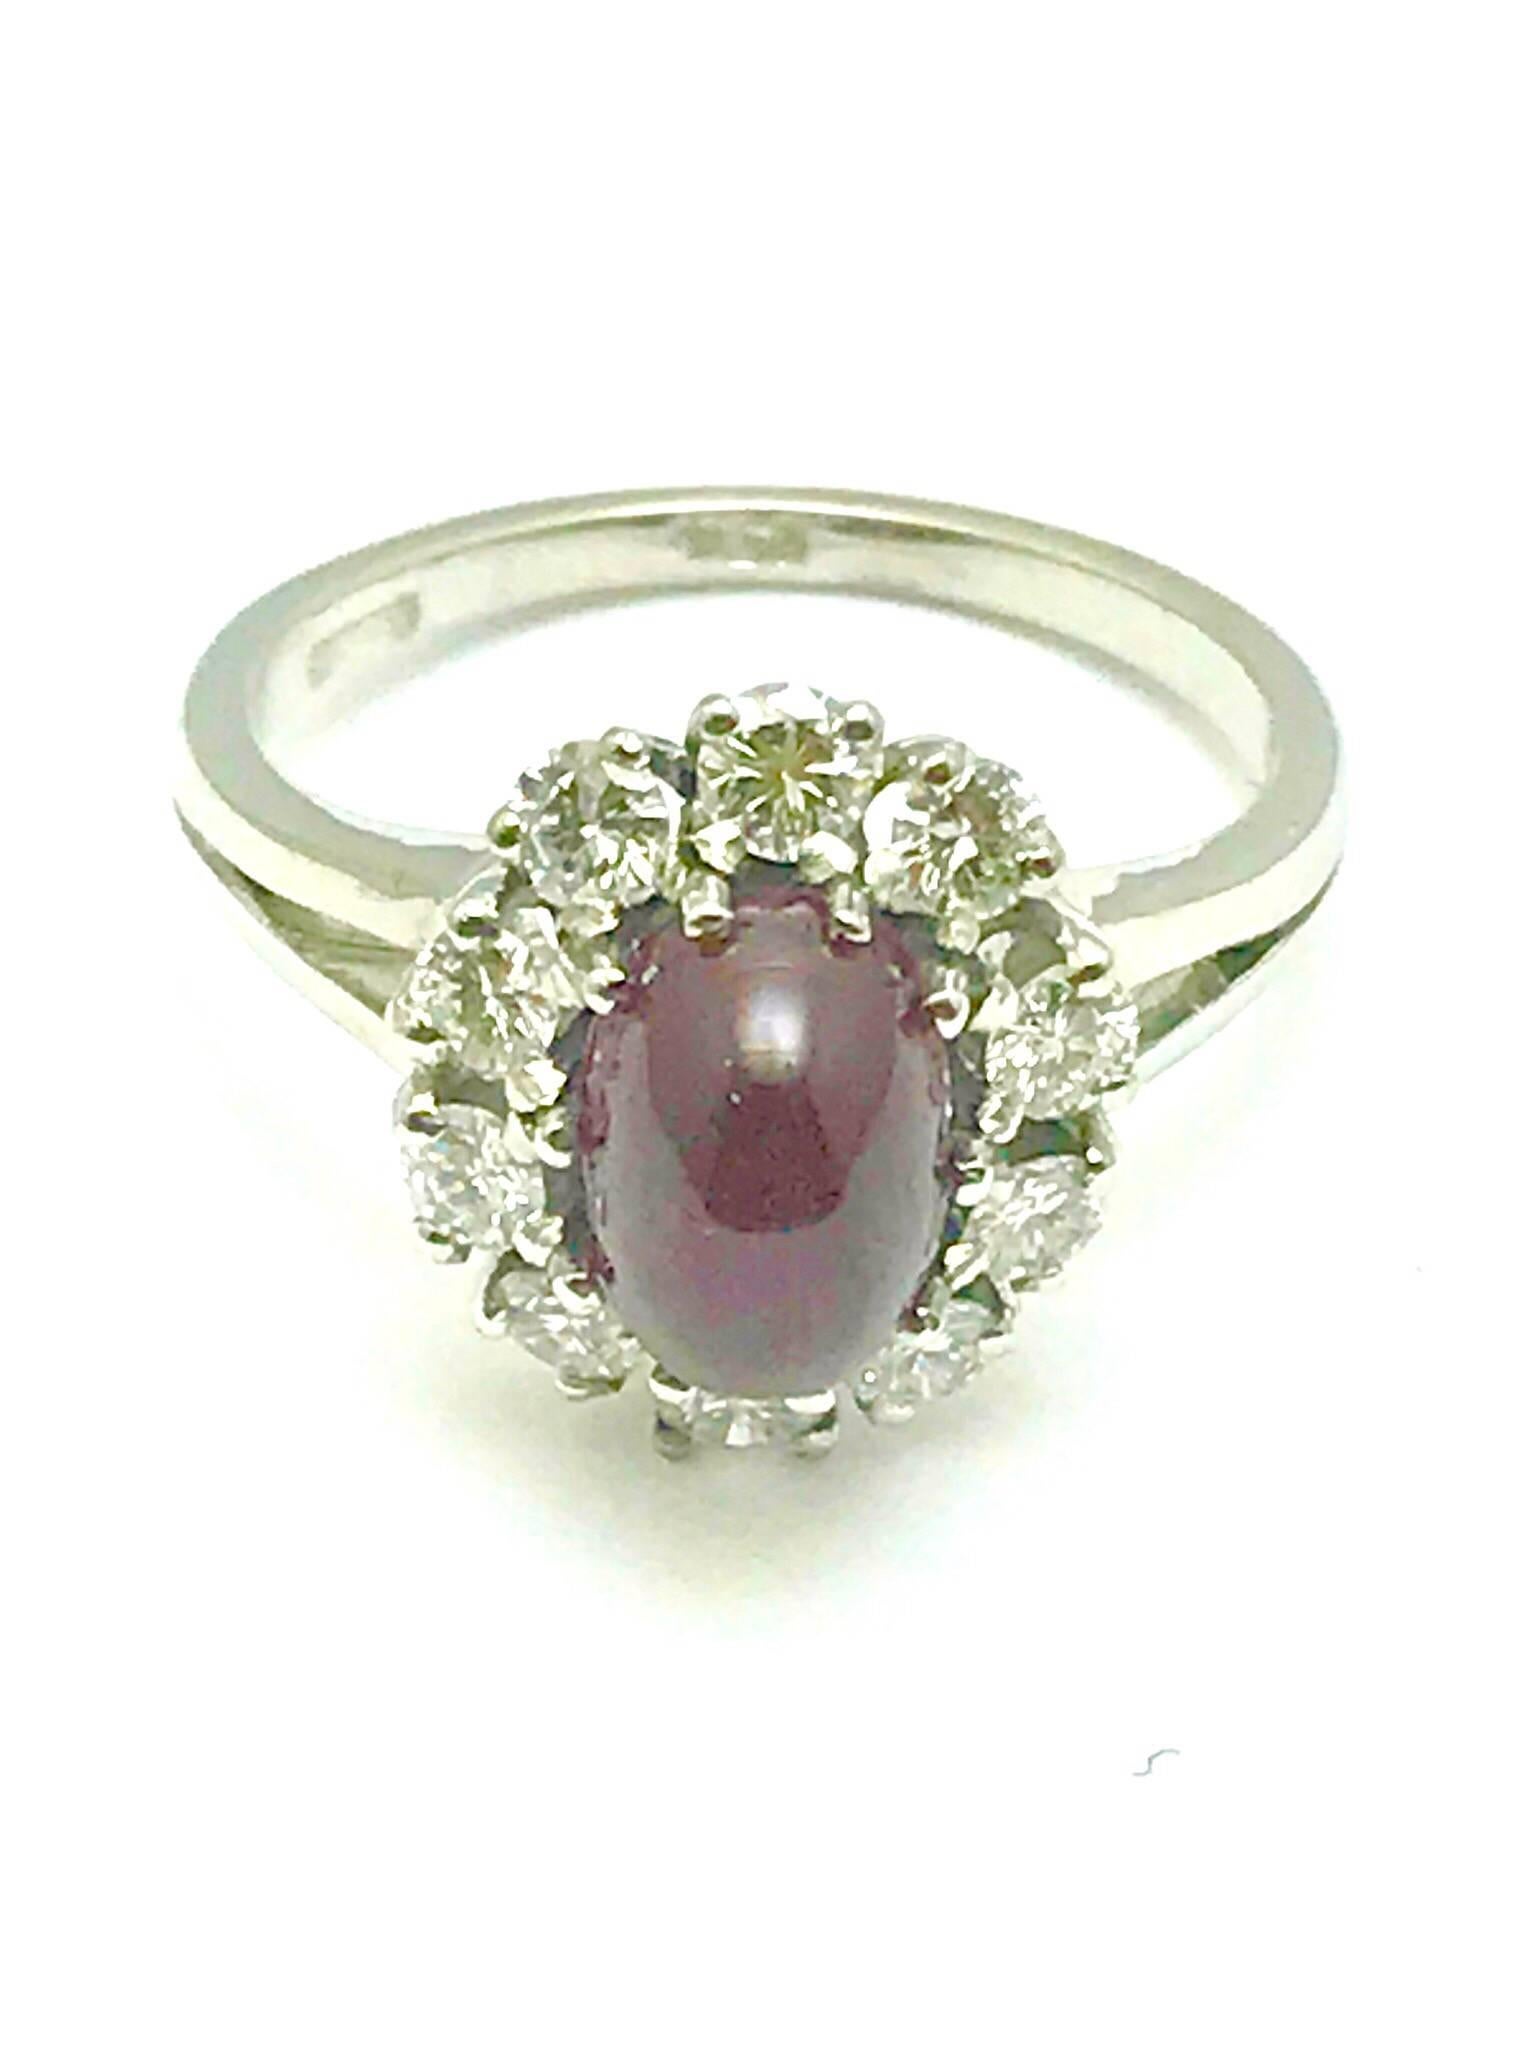 A cabochon natural ruby and round brilliant diamond 18 karat white gold ring.  The ruby is 2.46 carats, prong set, with ten diamonds surrounding it.  The diamonds have a total carat weight of 0.70 carats, and are graded as G color, VS clarity.  The